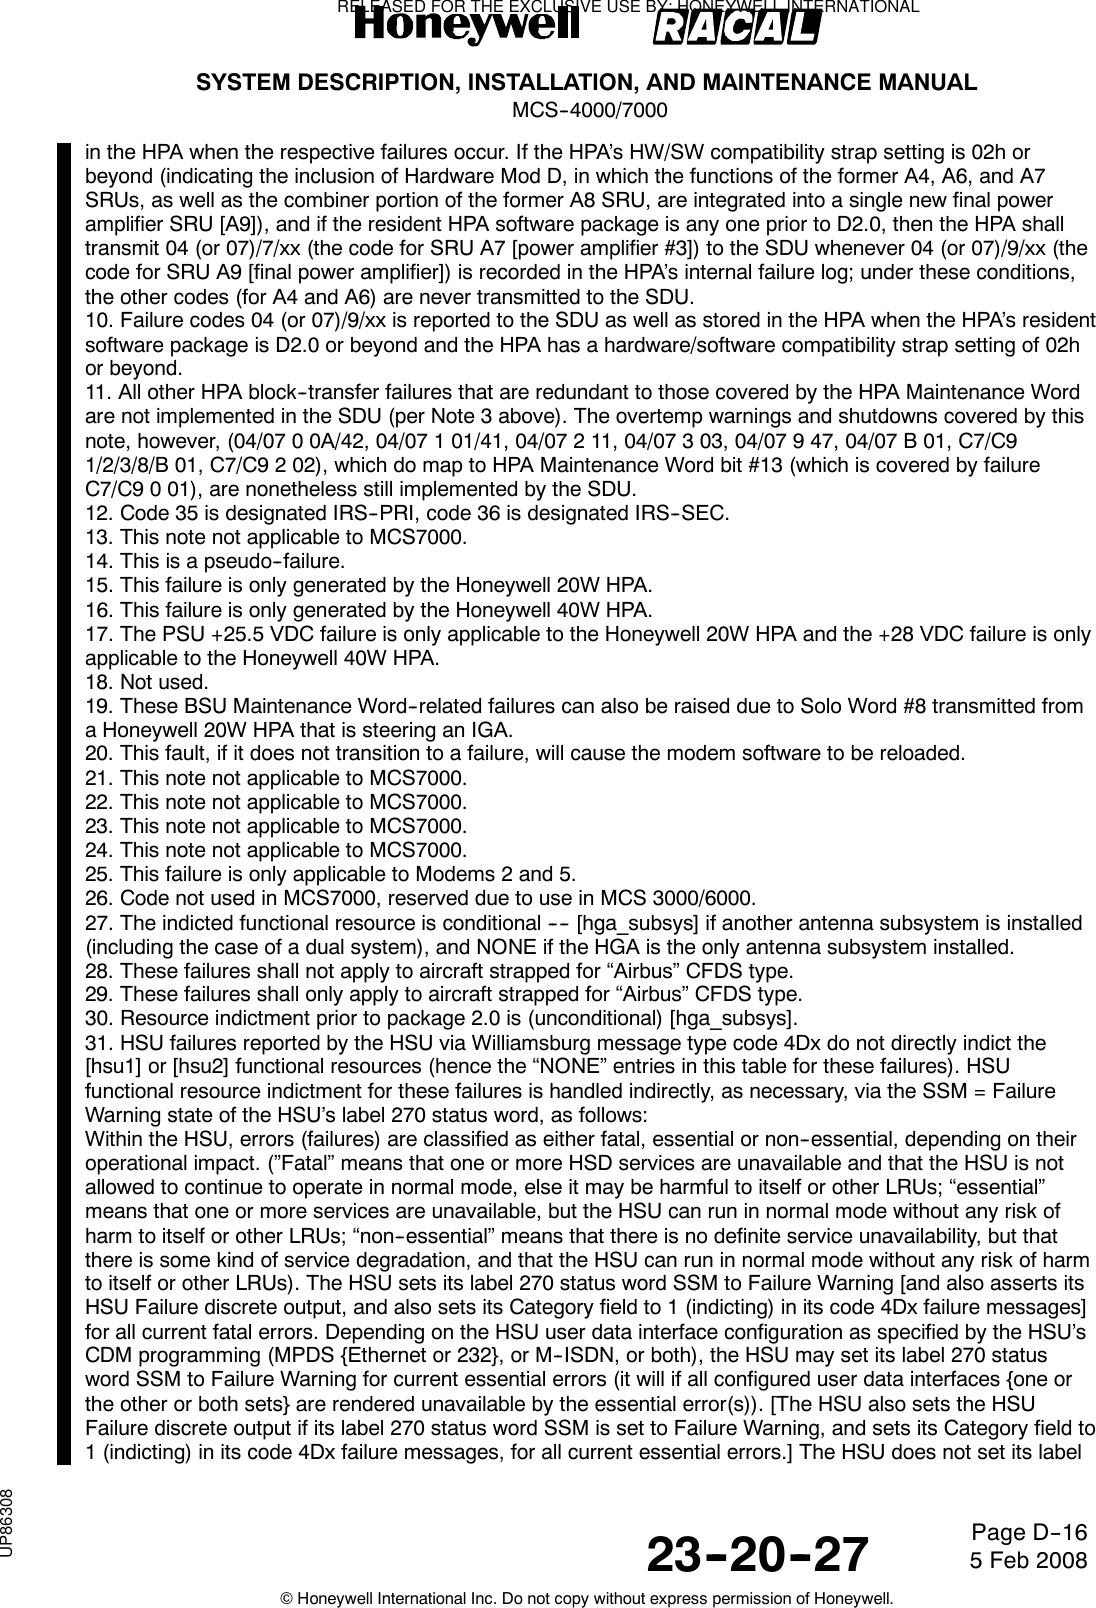 SYSTEM DESCRIPTION, INSTALLATION, AND MAINTENANCE MANUALMCS--4000/700023--20--27 5 Feb 2008©Honeywell International Inc. Do not copy without express permission of Honeywell.Page D--16in the HPA when the respective failures occur. If the HPA’s HW/SW compatibility strap setting is 02h orbeyond (indicating the inclusion of Hardware Mod D, in which the functions of the former A4, A6, and A7SRUs, as well as the combiner portion of the former A8 SRU, are integrated into a single new final poweramplifier SRU [A9]), and if the resident HPA software package is any one prior to D2.0, then the HPA shalltransmit 04 (or 07)/7/xx (the code for SRU A7 [power amplifier #3]) to the SDU whenever 04 (or 07)/9/xx (thecode for SRU A9 [final power amplifier]) is recorded in the HPA’s internal failure log; under these conditions,the other codes (for A4 and A6) are never transmitted to the SDU.10. Failure codes 04 (or 07)/9/xx is reported to the SDU as well as stored in the HPA when the HPA’s residentsoftware package is D2.0 or beyond and the HPA has a hardware/software compatibility strap setting of 02hor beyond.11. All other HPA block--transfer failures that are redundant to those covered by the HPA Maintenance Wordare not implemented in the SDU (per Note 3 above). The overtemp warnings and shutdowns covered by thisnote, however, (04/07 0 0A/42, 04/07 1 01/41, 04/07 2 11, 04/07 3 03, 04/07 9 47, 04/07 B 01, C7/C91/2/3/8/B 01, C7/C9 2 02), which do map to HPA Maintenance Word bit #13 (which is covered by failureC7/C9 0 01), are nonetheless still implemented by the SDU.12. Code 35 is designated IRS--PRI, code 36 is designated IRS--SEC.13. This note not applicable to MCS7000.14. This is a pseudo--failure.15. This failure is only generated by the Honeywell 20W HPA.16. This failure is only generated by the Honeywell 40W HPA.17. The PSU +25.5 VDC failure is only applicable to the Honeywell 20W HPA and the +28 VDC failure is onlyapplicable to the Honeywell 40W HPA.18. Not used.19. These BSU Maintenance Word--related failures can also be raised due to Solo Word #8 transmitted froma Honeywell 20W HPA that is steering an IGA.20. This fault, if it does not transition to a failure, will cause the modem software to be reloaded.21. This note not applicable to MCS7000.22. This note not applicable to MCS7000.23. This note not applicable to MCS7000.24. This note not applicable to MCS7000.25. This failure is only applicable to Modems 2 and 5.26. Code not used in MCS7000, reserved due to use in MCS 3000/6000.27. The indicted functional resource is conditional ---- [hga_subsys] if another antenna subsystem is installed(including the case of a dual system), and NONE if the HGA is the only antenna subsystem installed.28. These failures shall not apply to aircraft strapped for “Airbus” CFDS type.29. These failures shall only apply to aircraft strapped for “Airbus” CFDS type.30. Resource indictment prior to package 2.0 is (unconditional) [hga_subsys].31. HSU failures reported by the HSU via Williamsburg message type code 4Dx do not directly indict the[hsu1] or [hsu2] functional resources (hence the “NONE” entries in this table for these failures). HSUfunctional resource indictment for these failures is handled indirectly, as necessary, via the SSM = FailureWarning state of the HSU’s label 270 status word, as follows:Within the HSU, errors (failures) are classified as either fatal, essential or non--essential, depending on theiroperational impact. (”Fatal” means that one or more HSD services are unavailable and that the HSU is notallowed to continue to operate in normal mode, else it may be harmful to itself or other LRUs; “essential”means that one or more services are unavailable, but the HSU can run in normal mode without any risk ofharm to itself or other LRUs; “non--essential” means that there is no definite service unavailability, but thatthere is some kind of service degradation, and that the HSU can run in normal mode without any risk of harmto itself or other LRUs). The HSU sets its label 270 status word SSM to Failure Warning [and also asserts itsHSU Failure discrete output, and also sets its Category field to 1 (indicting) in its code 4Dx failure messages]for all current fatal errors. Depending on the HSU user data interface configuration as specified by the HSU’sCDM programming (MPDS {Ethernet or 232}, or M--ISDN, or both), the HSU may set its label 270 statusword SSM to Failure Warning for current essential errors (it will if all configured user data interfaces {one orthe other or both sets} are rendered unavailable by the essential error(s)). [The HSU also sets the HSUFailure discrete output if its label 270 status word SSM is set to Failure Warning, and sets its Category field to1 (indicting) in its code 4Dx failure messages, for all current essential errors.] The HSU does not set its labelRELEASED FOR THE EXCLUSIVE USE BY: HONEYWELL INTERNATIONALUP86308